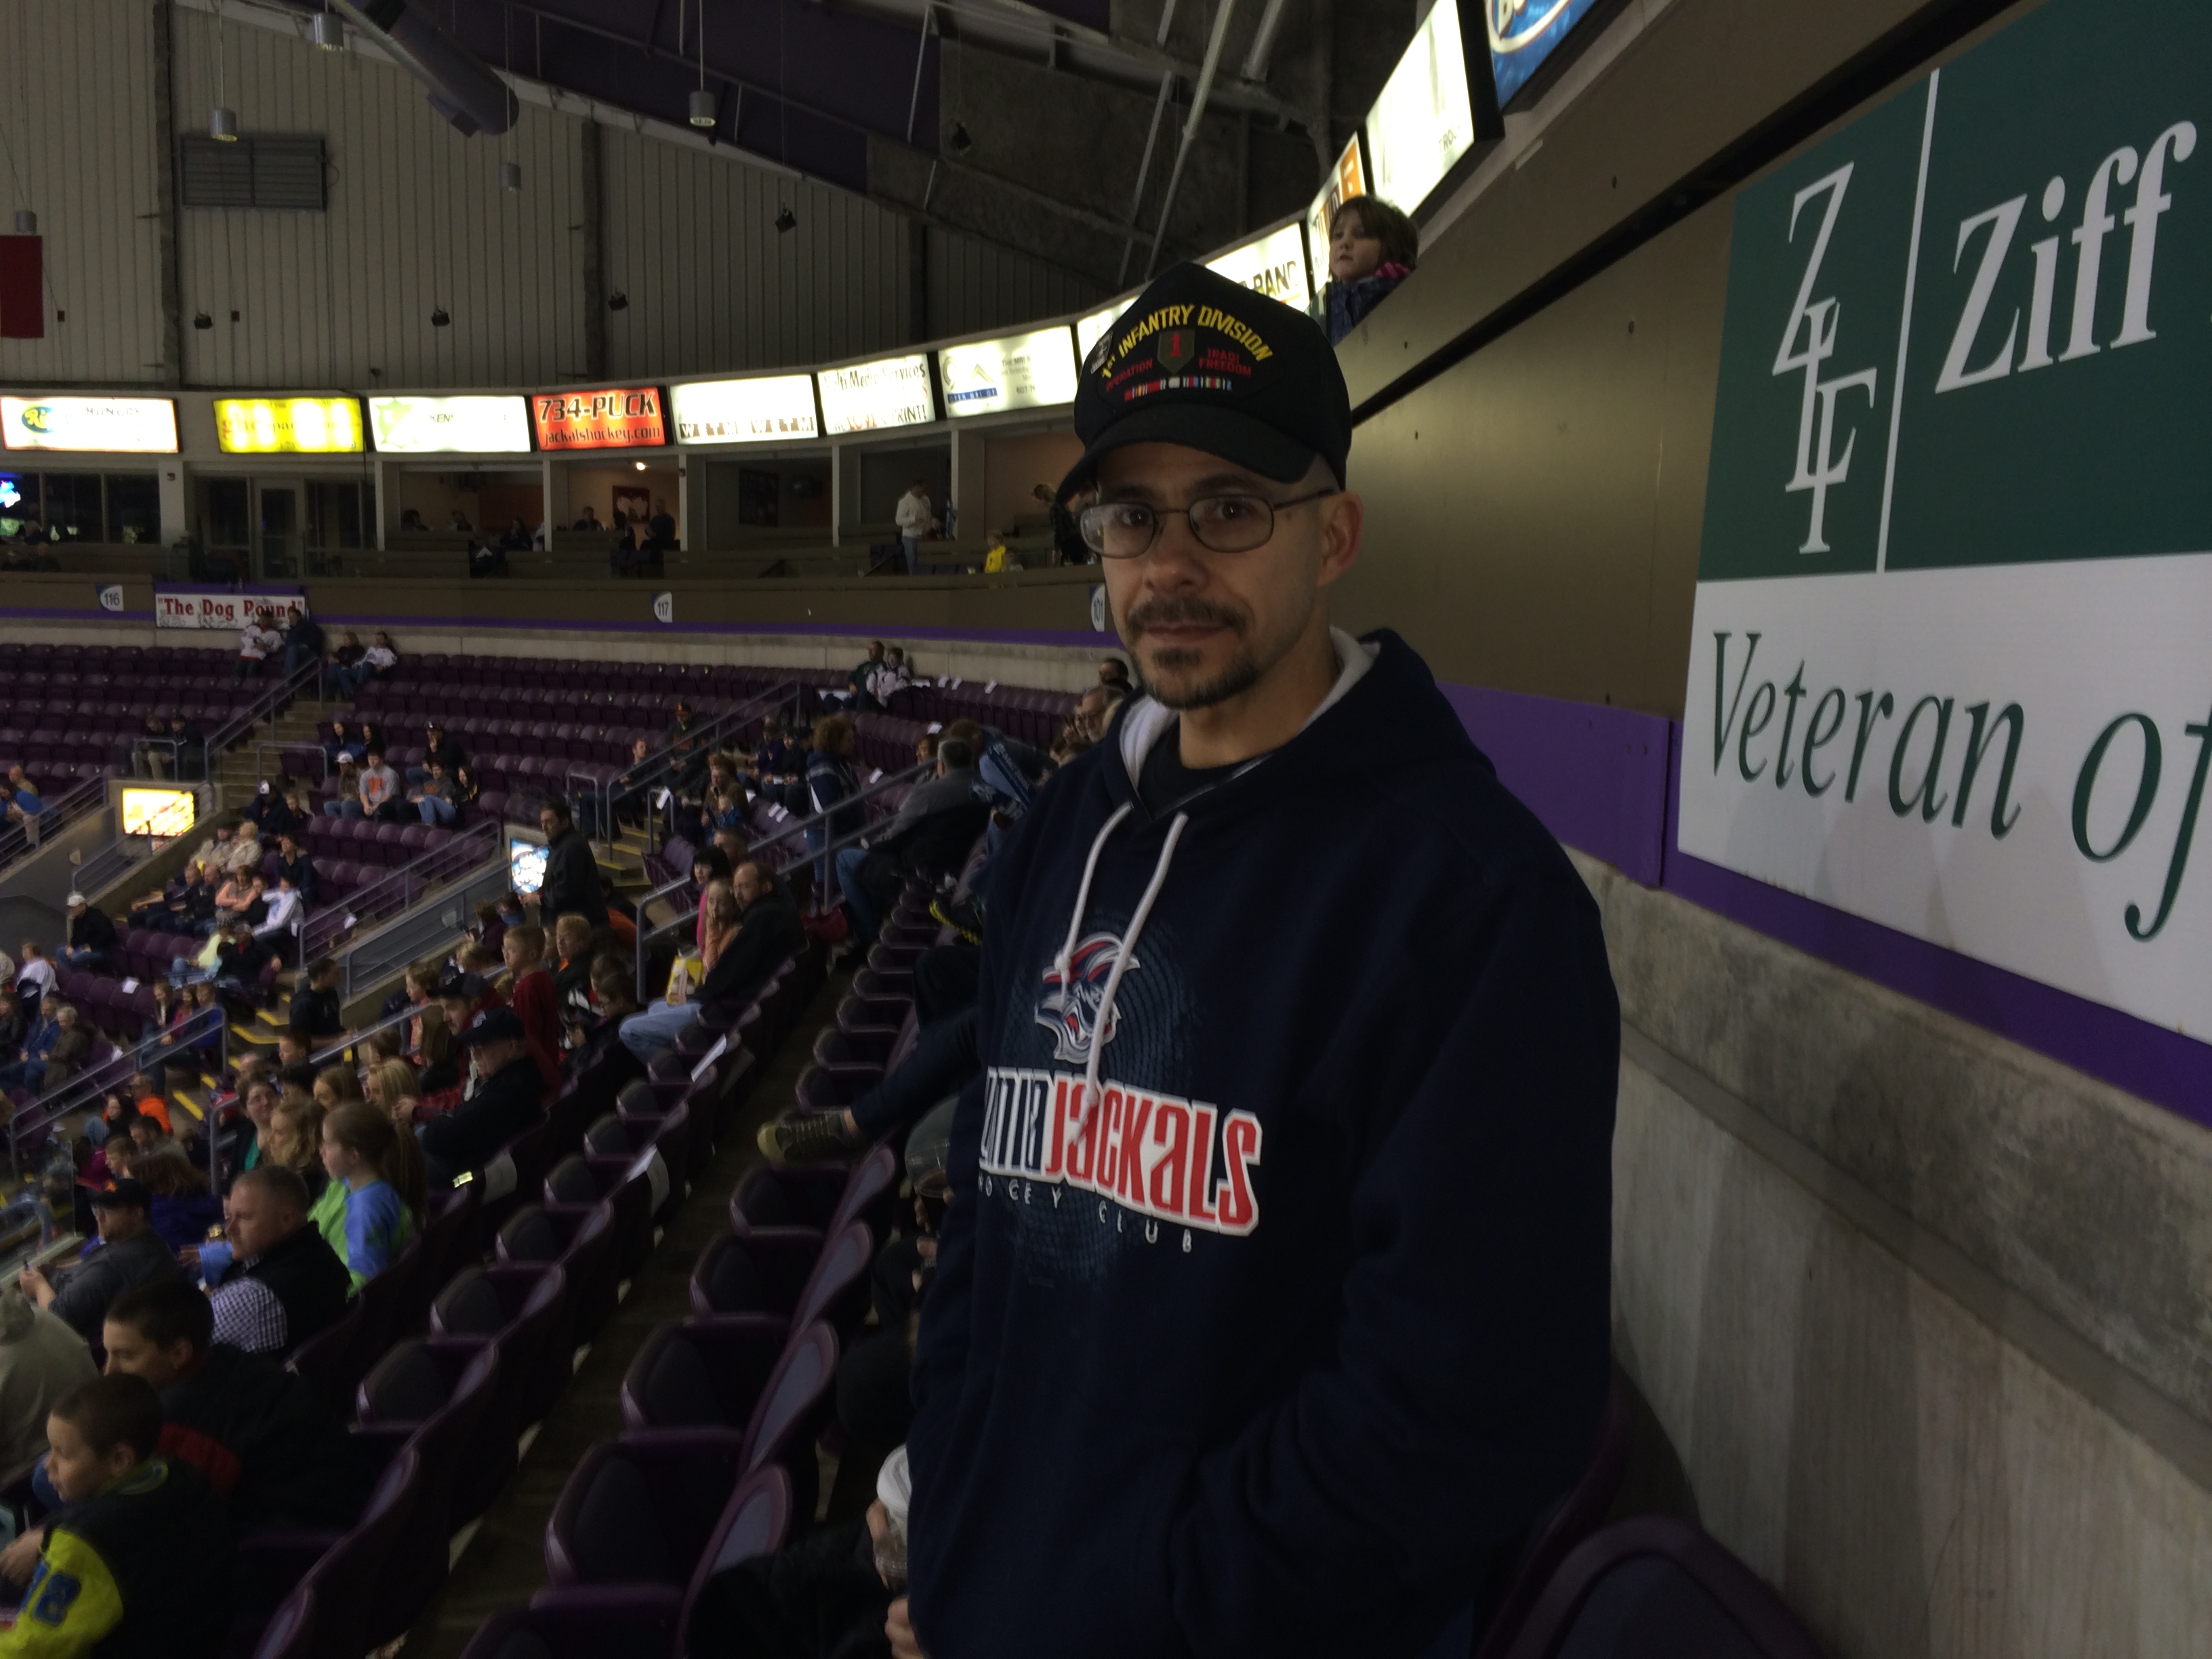 Army veteran Scott Swanson was among the more than 200 veterans honored at First Arena in Elmira during eight seasons of Elmira Jackals games.